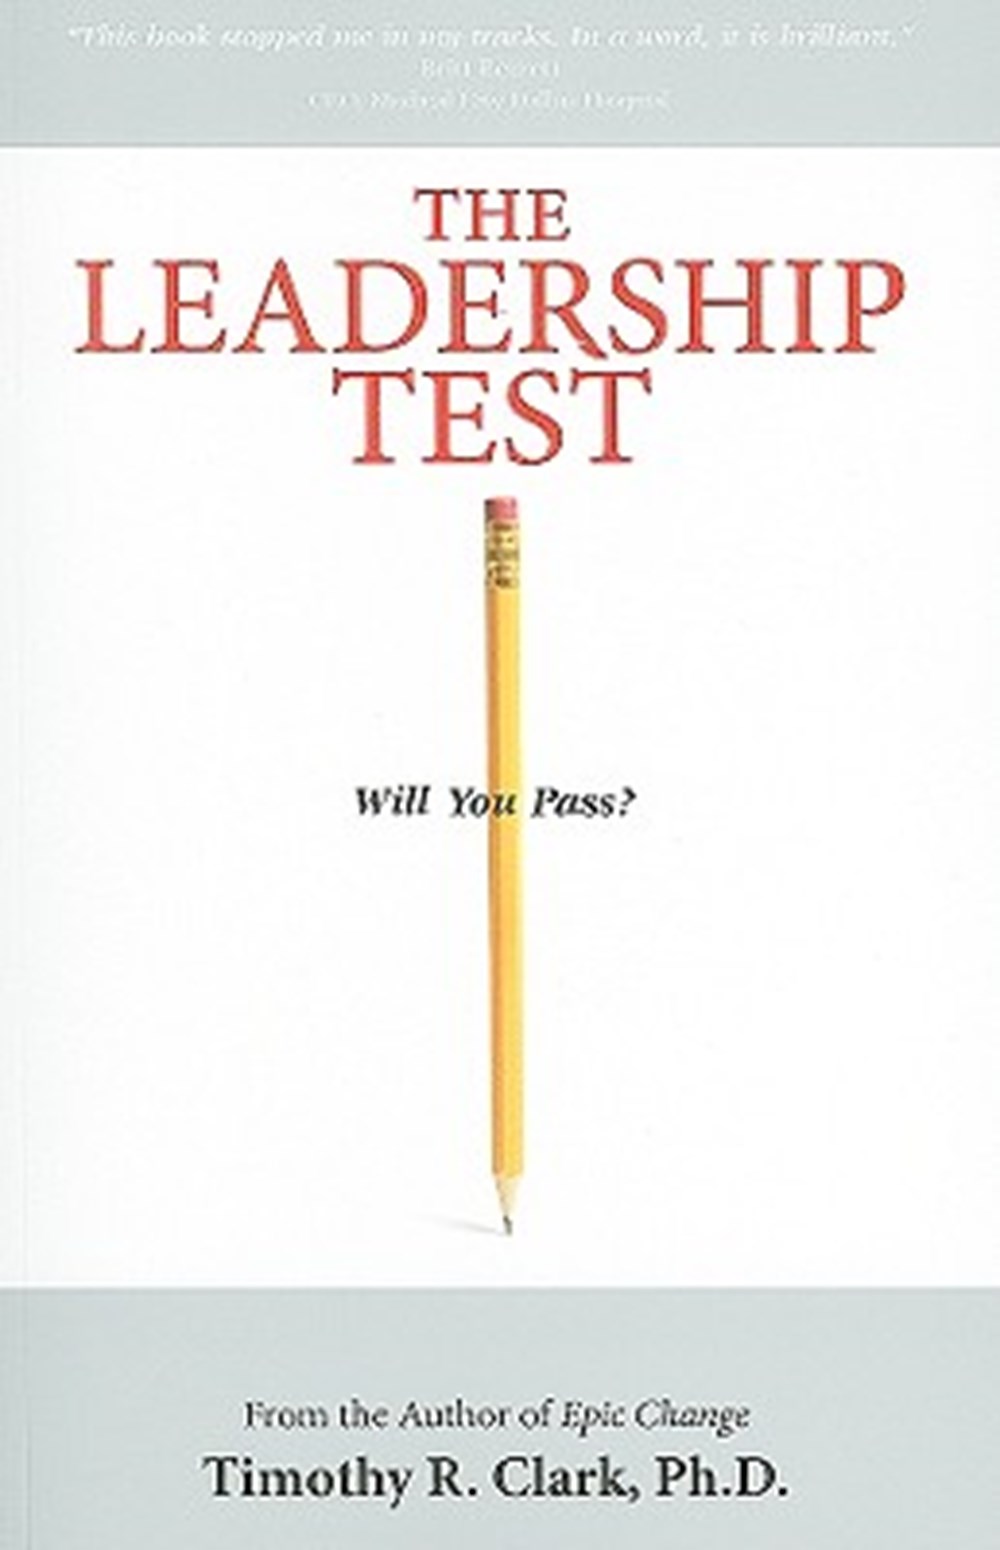 Leadership Test Will You Pass?